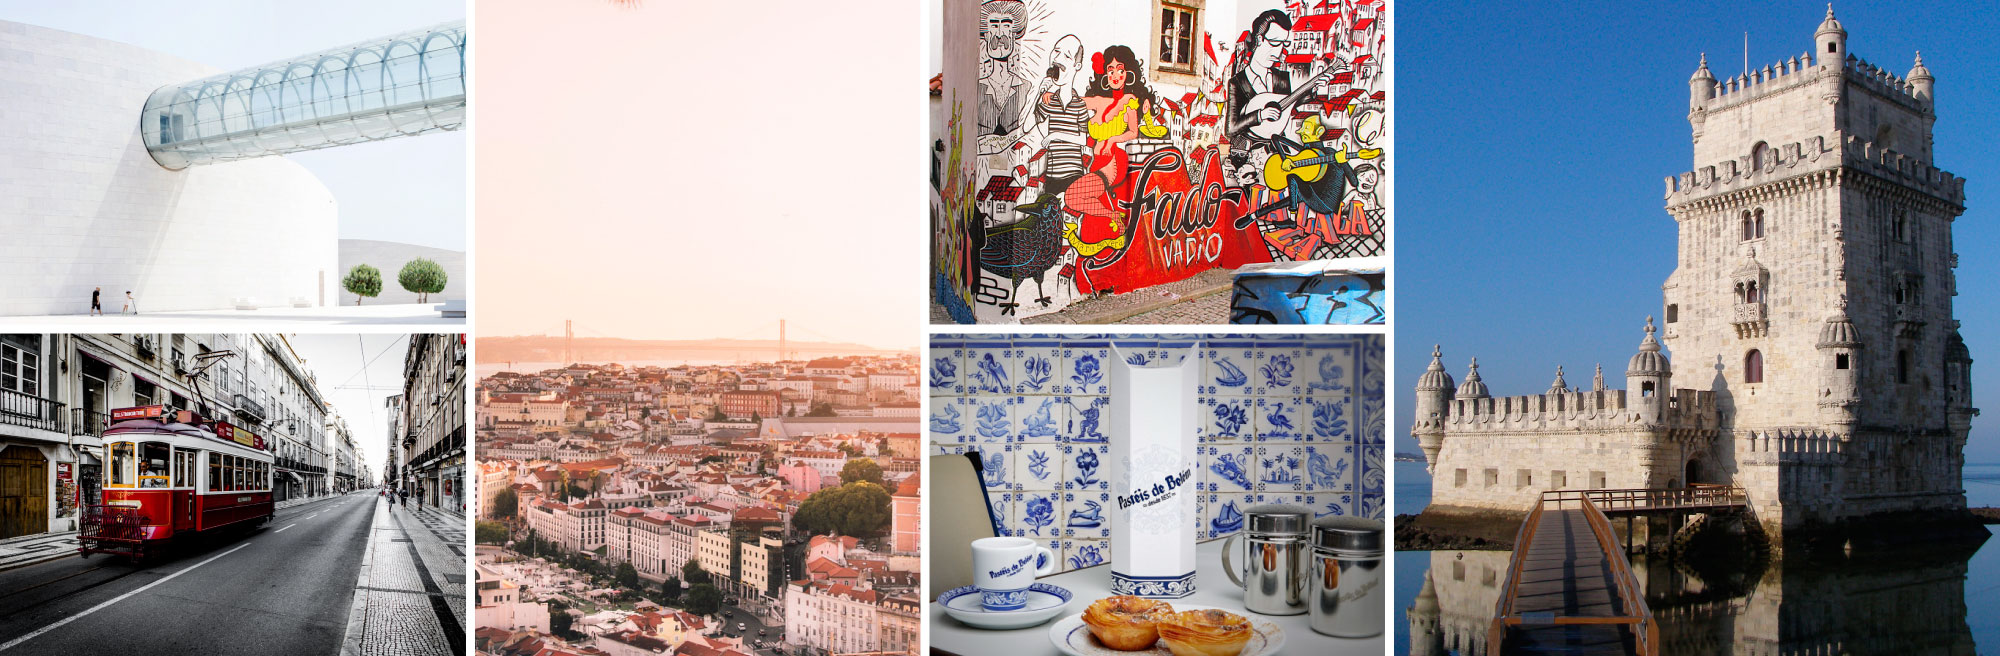 7 Reasons Lisbon could be Europe´s coolest city - by CNN